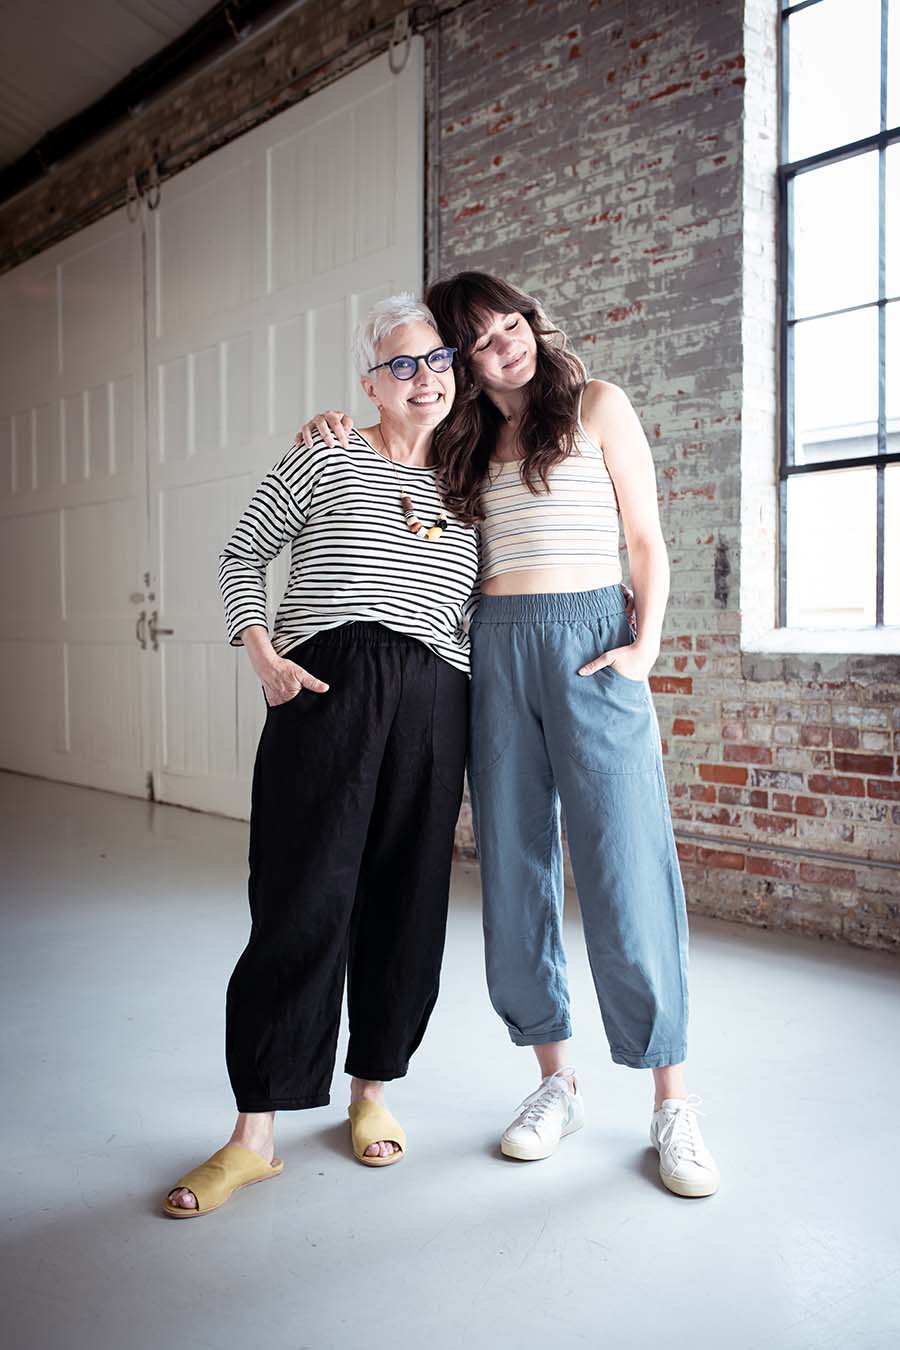 Cindy and Meredith pose together, CIndy wears black chanterelle pants and a striped top, Meredith wears blue chanterelle pants and a striped cami